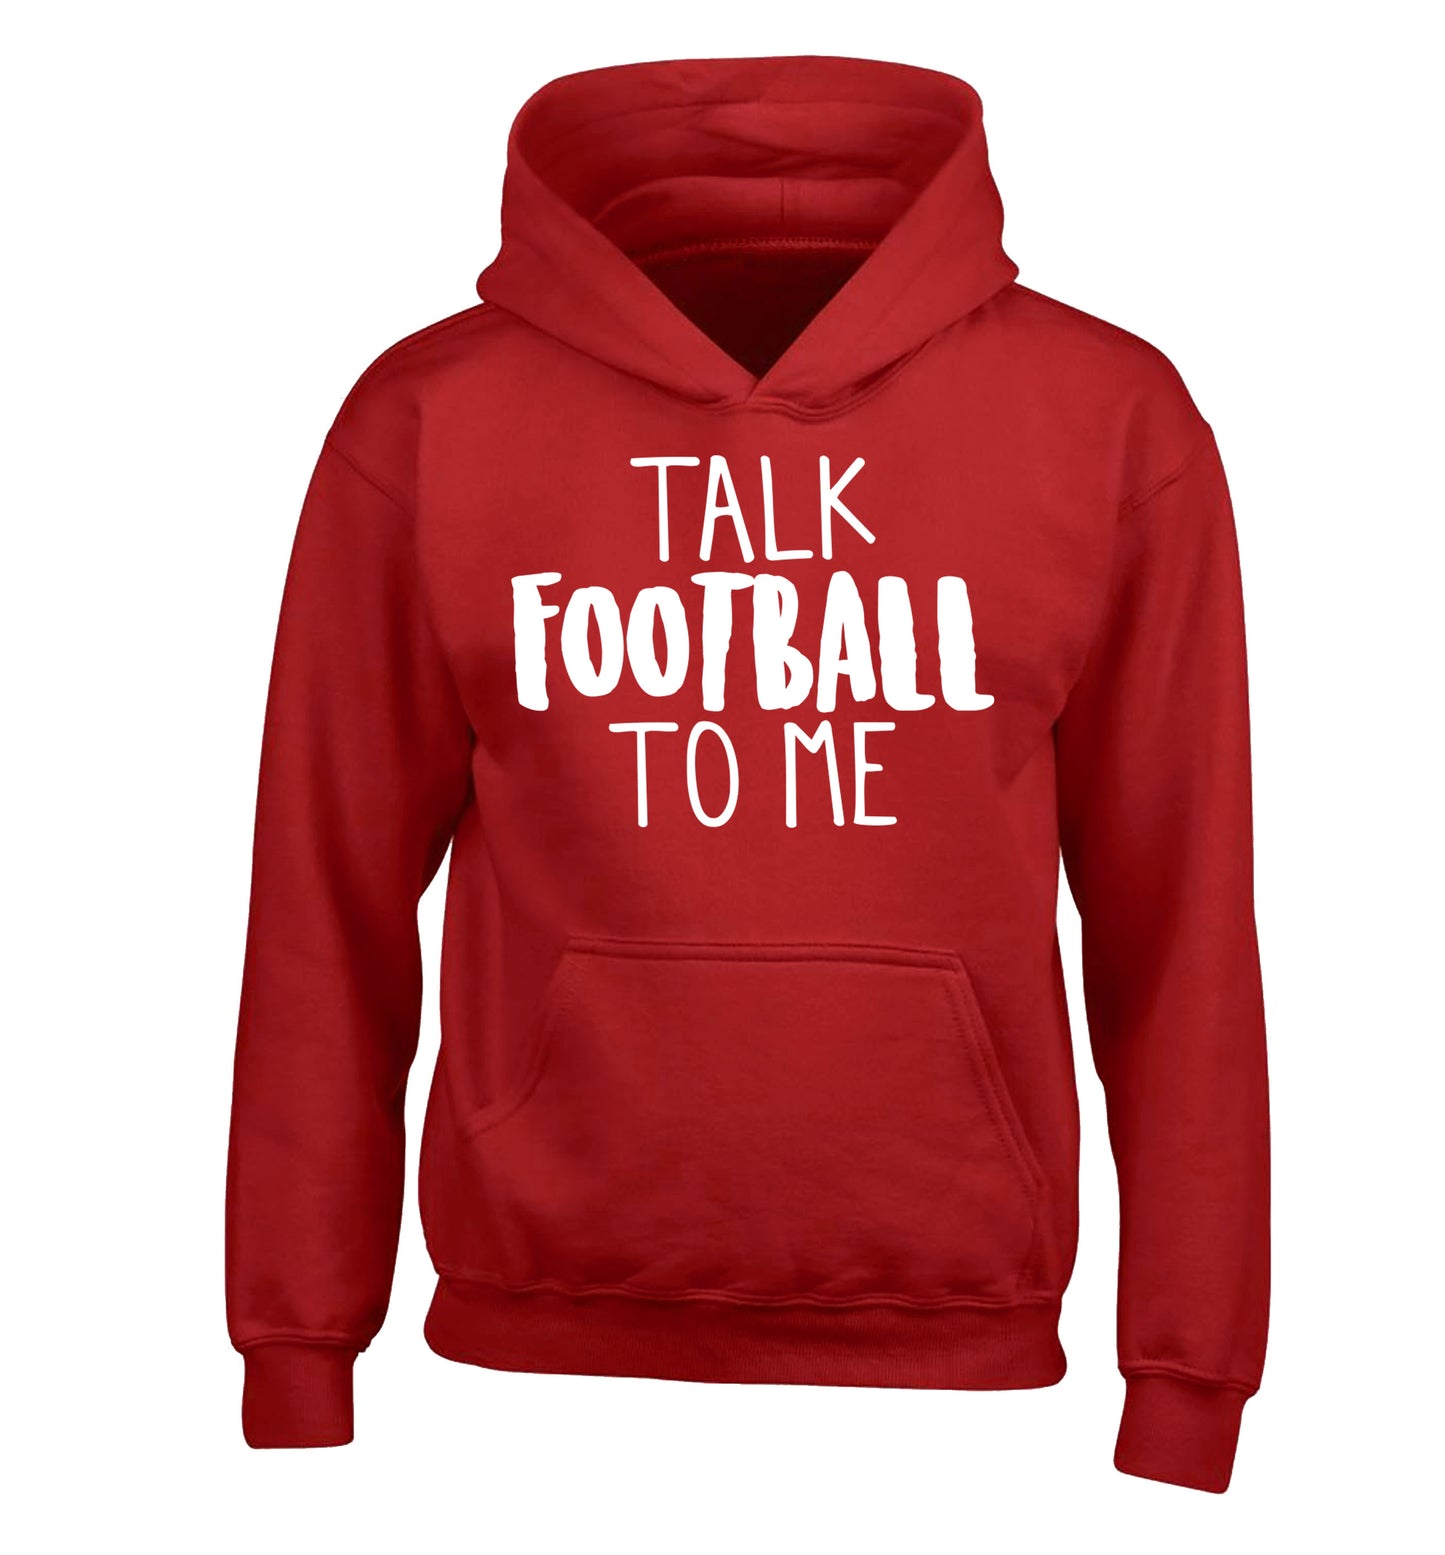 Talk football to me children's red hoodie 12-14 Years